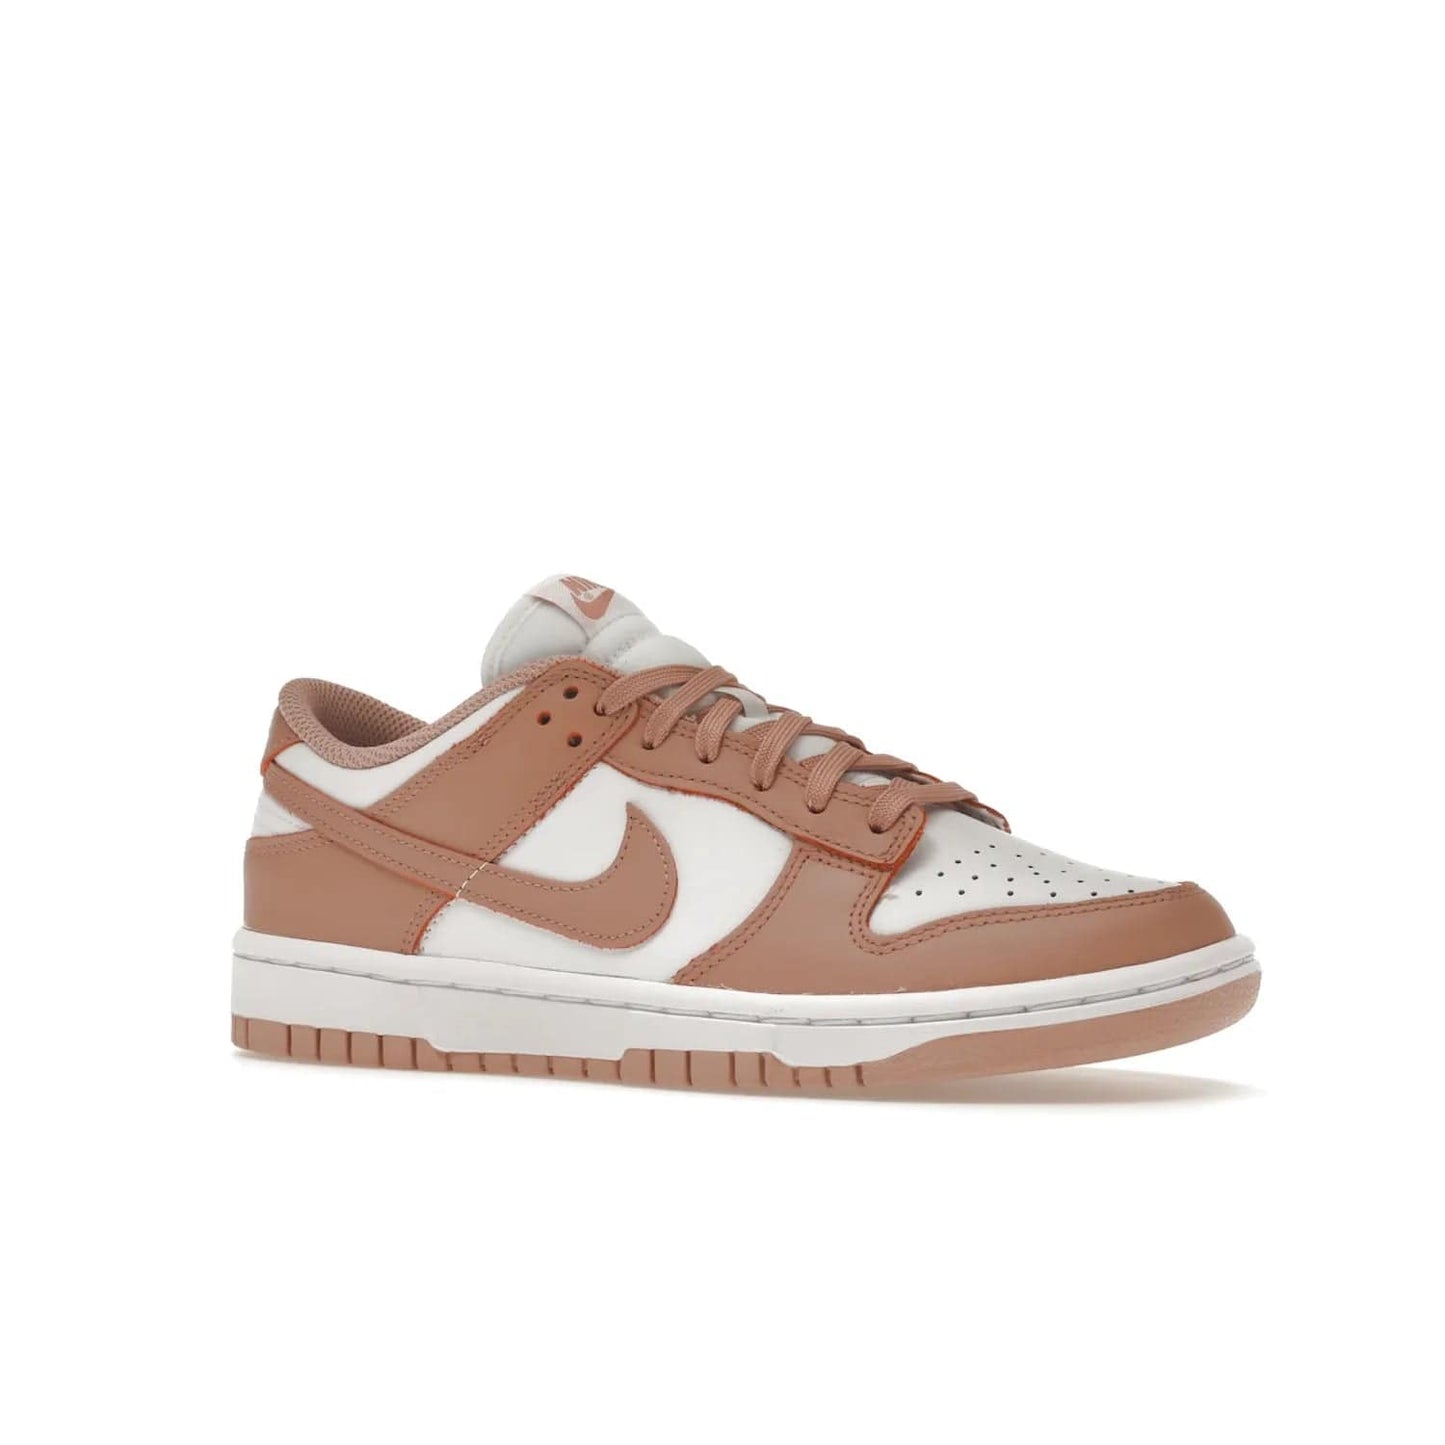 Nike Dunk Low Rose Whisper (Women's) - Image 4 - Only at www.BallersClubKickz.com - The Nike Dunk Low Rose Whisper is the perfect summer shoe with classic two-tone look and vintage-inspired design. Features white and Rose Whisper leather upper, woven tongue labels and EVA foam sole for plush cushioning. Available June 2022 at $100.